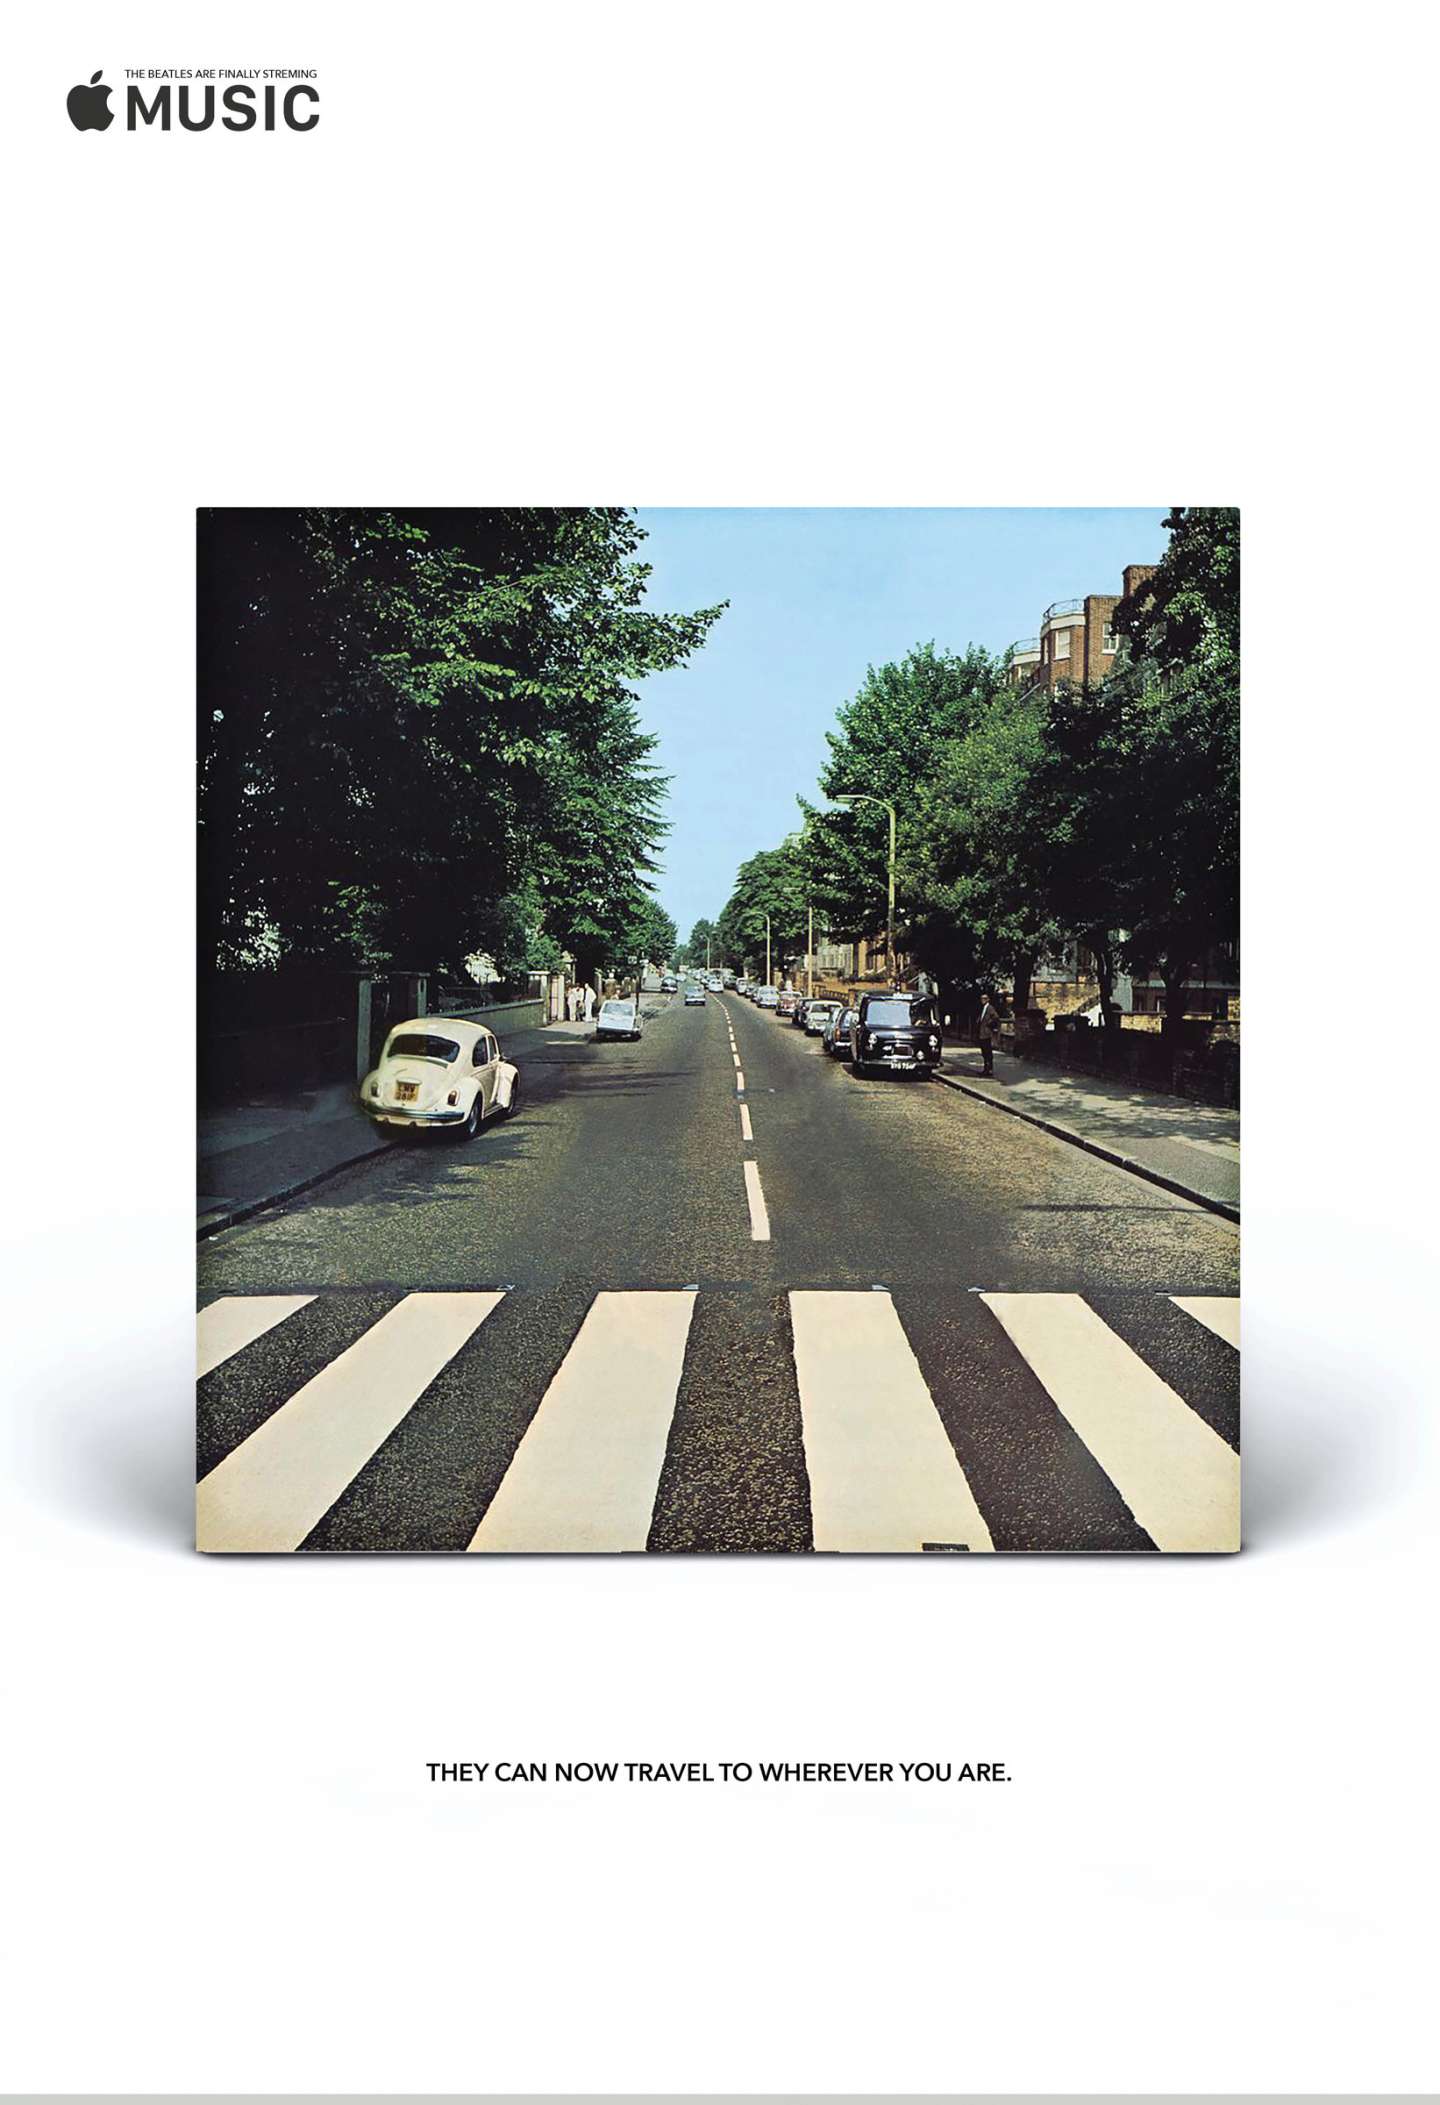 Apple Music Streaming - The Beatles